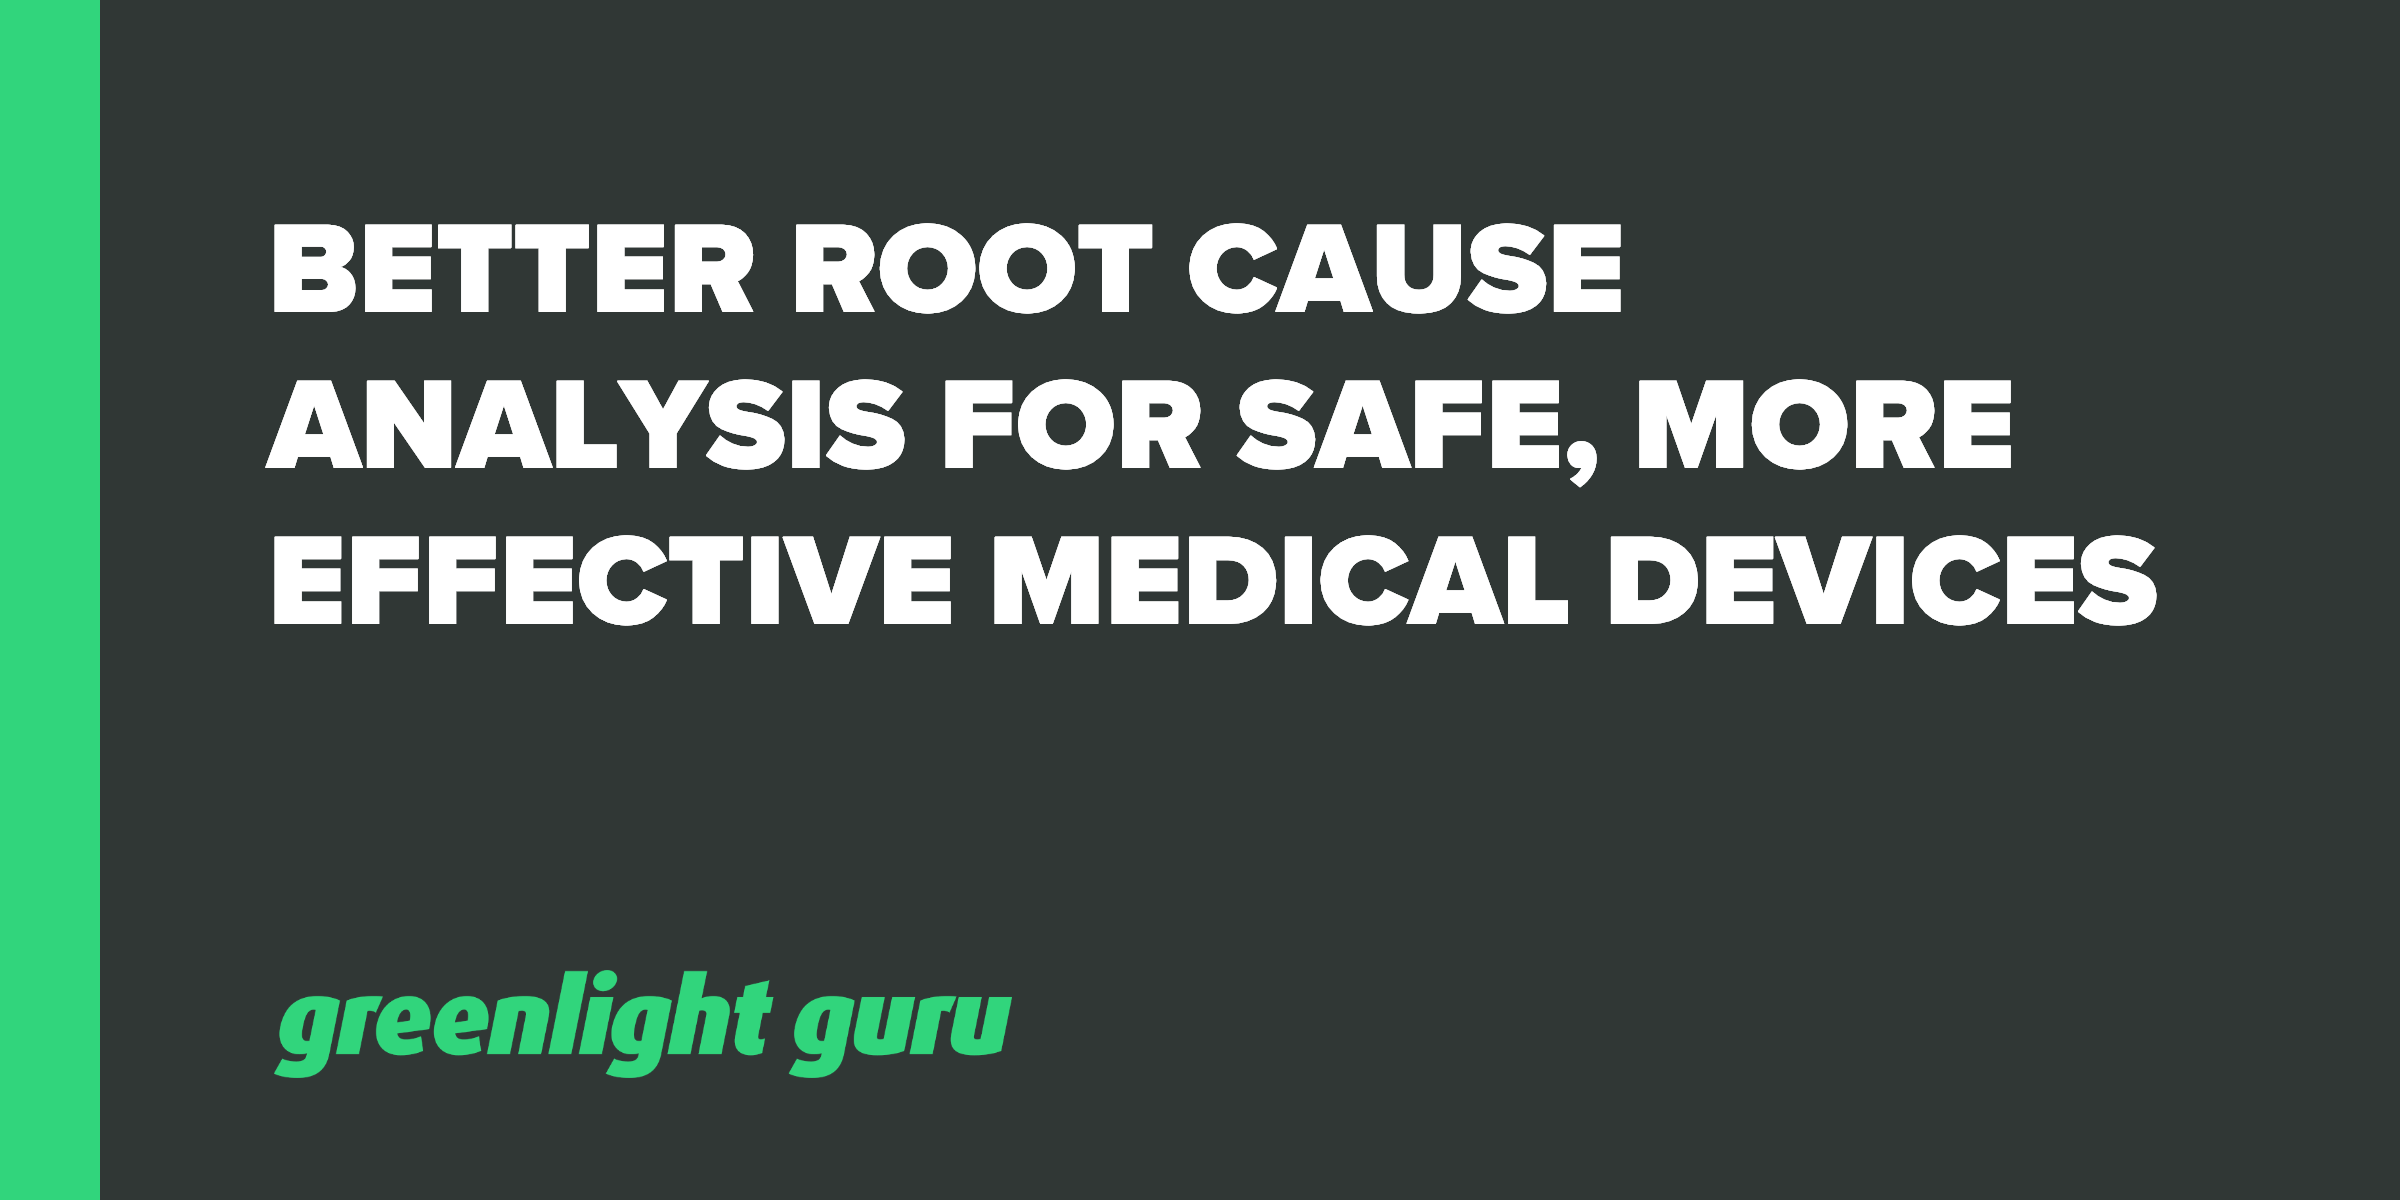 Better Root Cause Analysis for Safer, More Effective Medical Devices